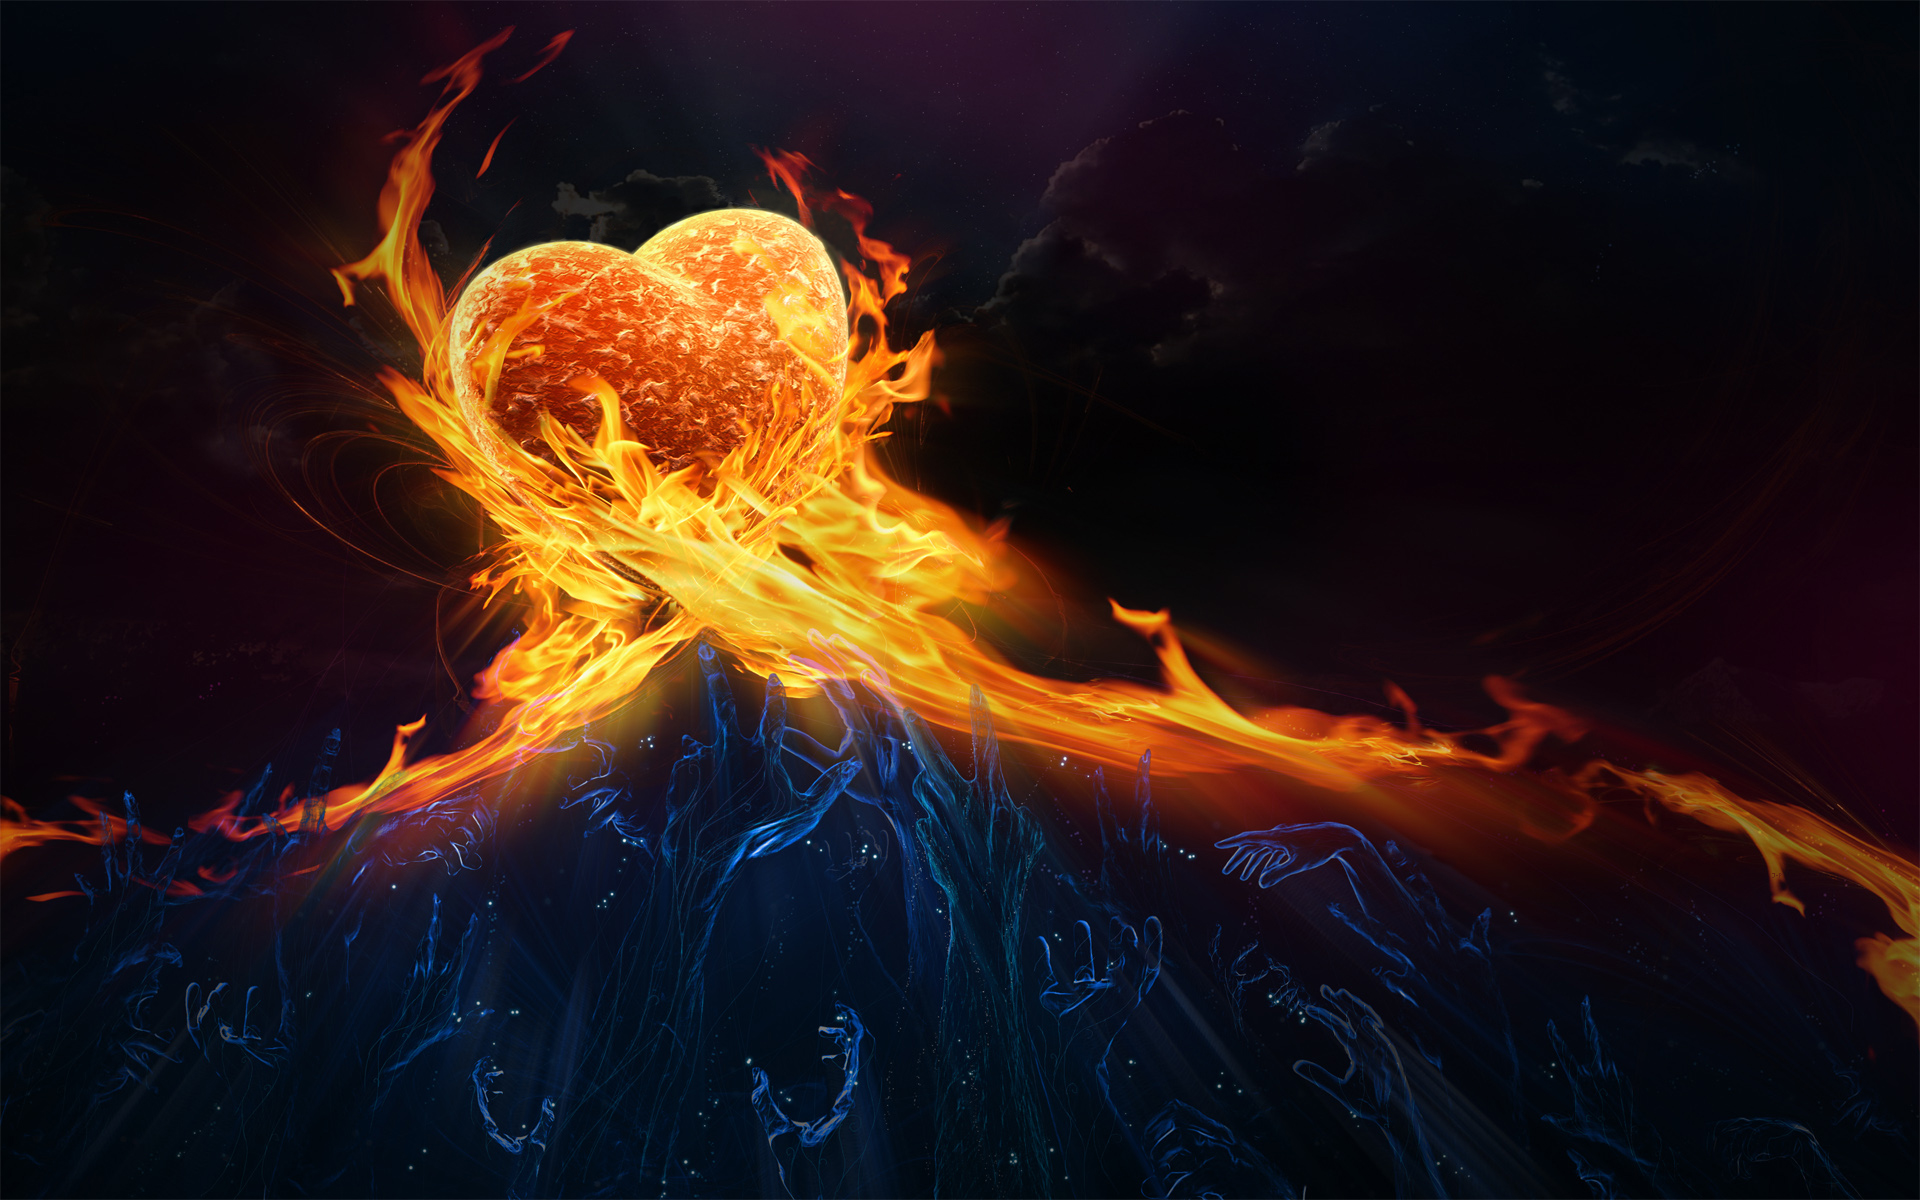 love, Romance, Hate, Fire, Flames, Ice, Mood, Emotion, Cold, Hot, Ying